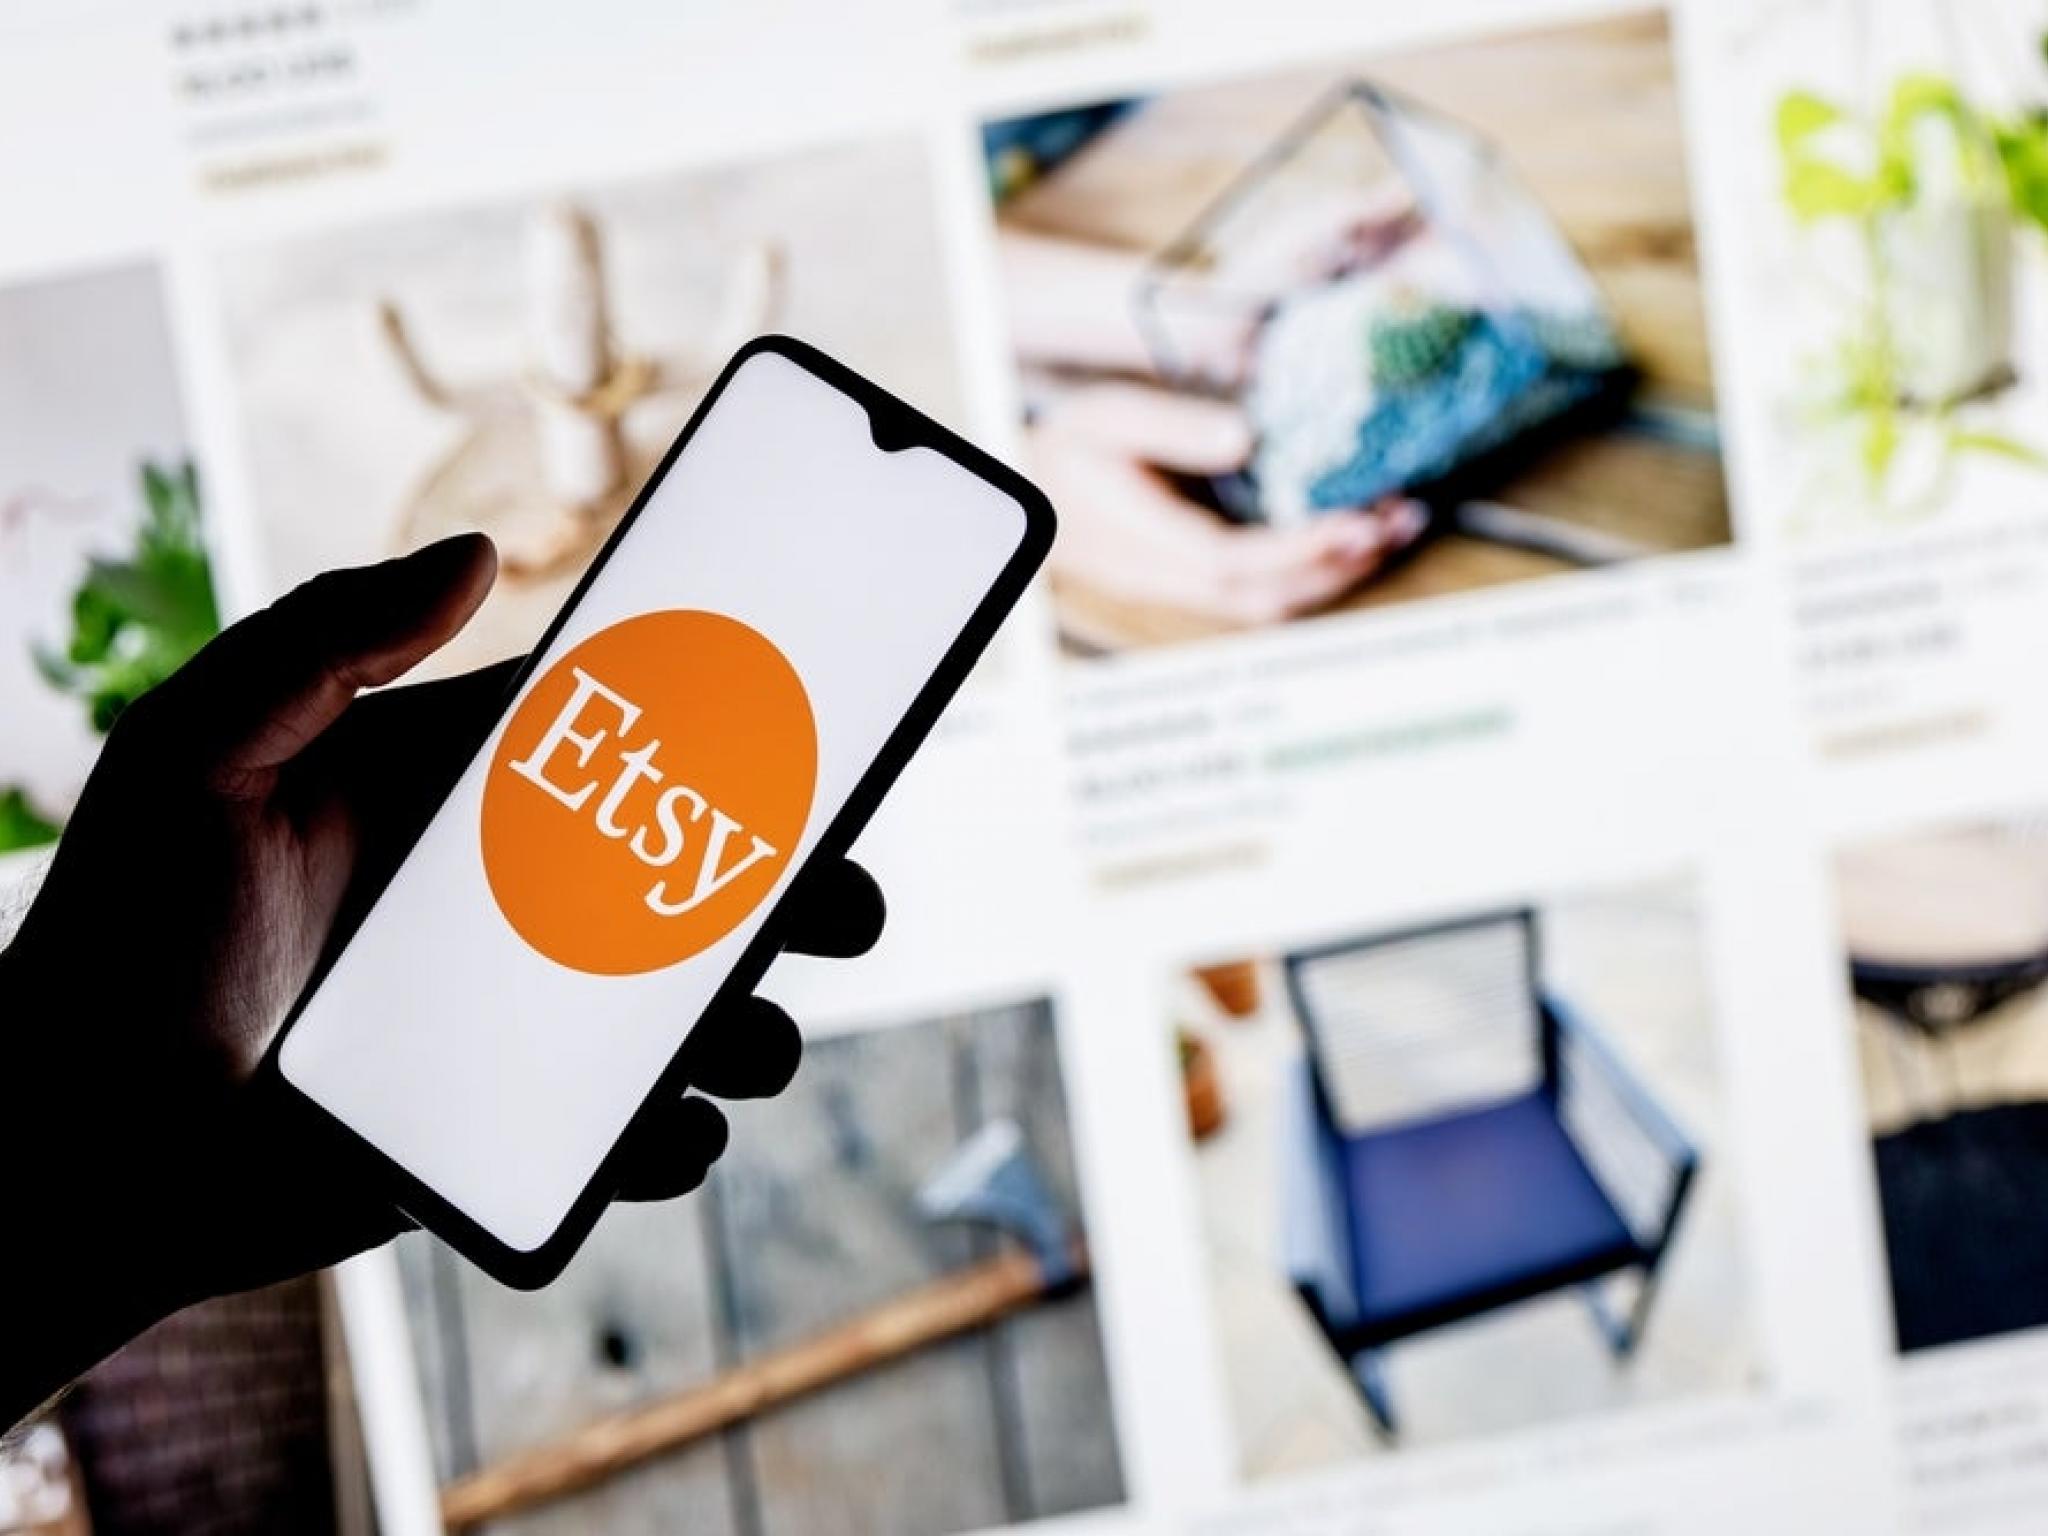  etsy-is-caught-between-maintaining-margins-and-spurring-growth-6-analysts-dive-into-q1-results 